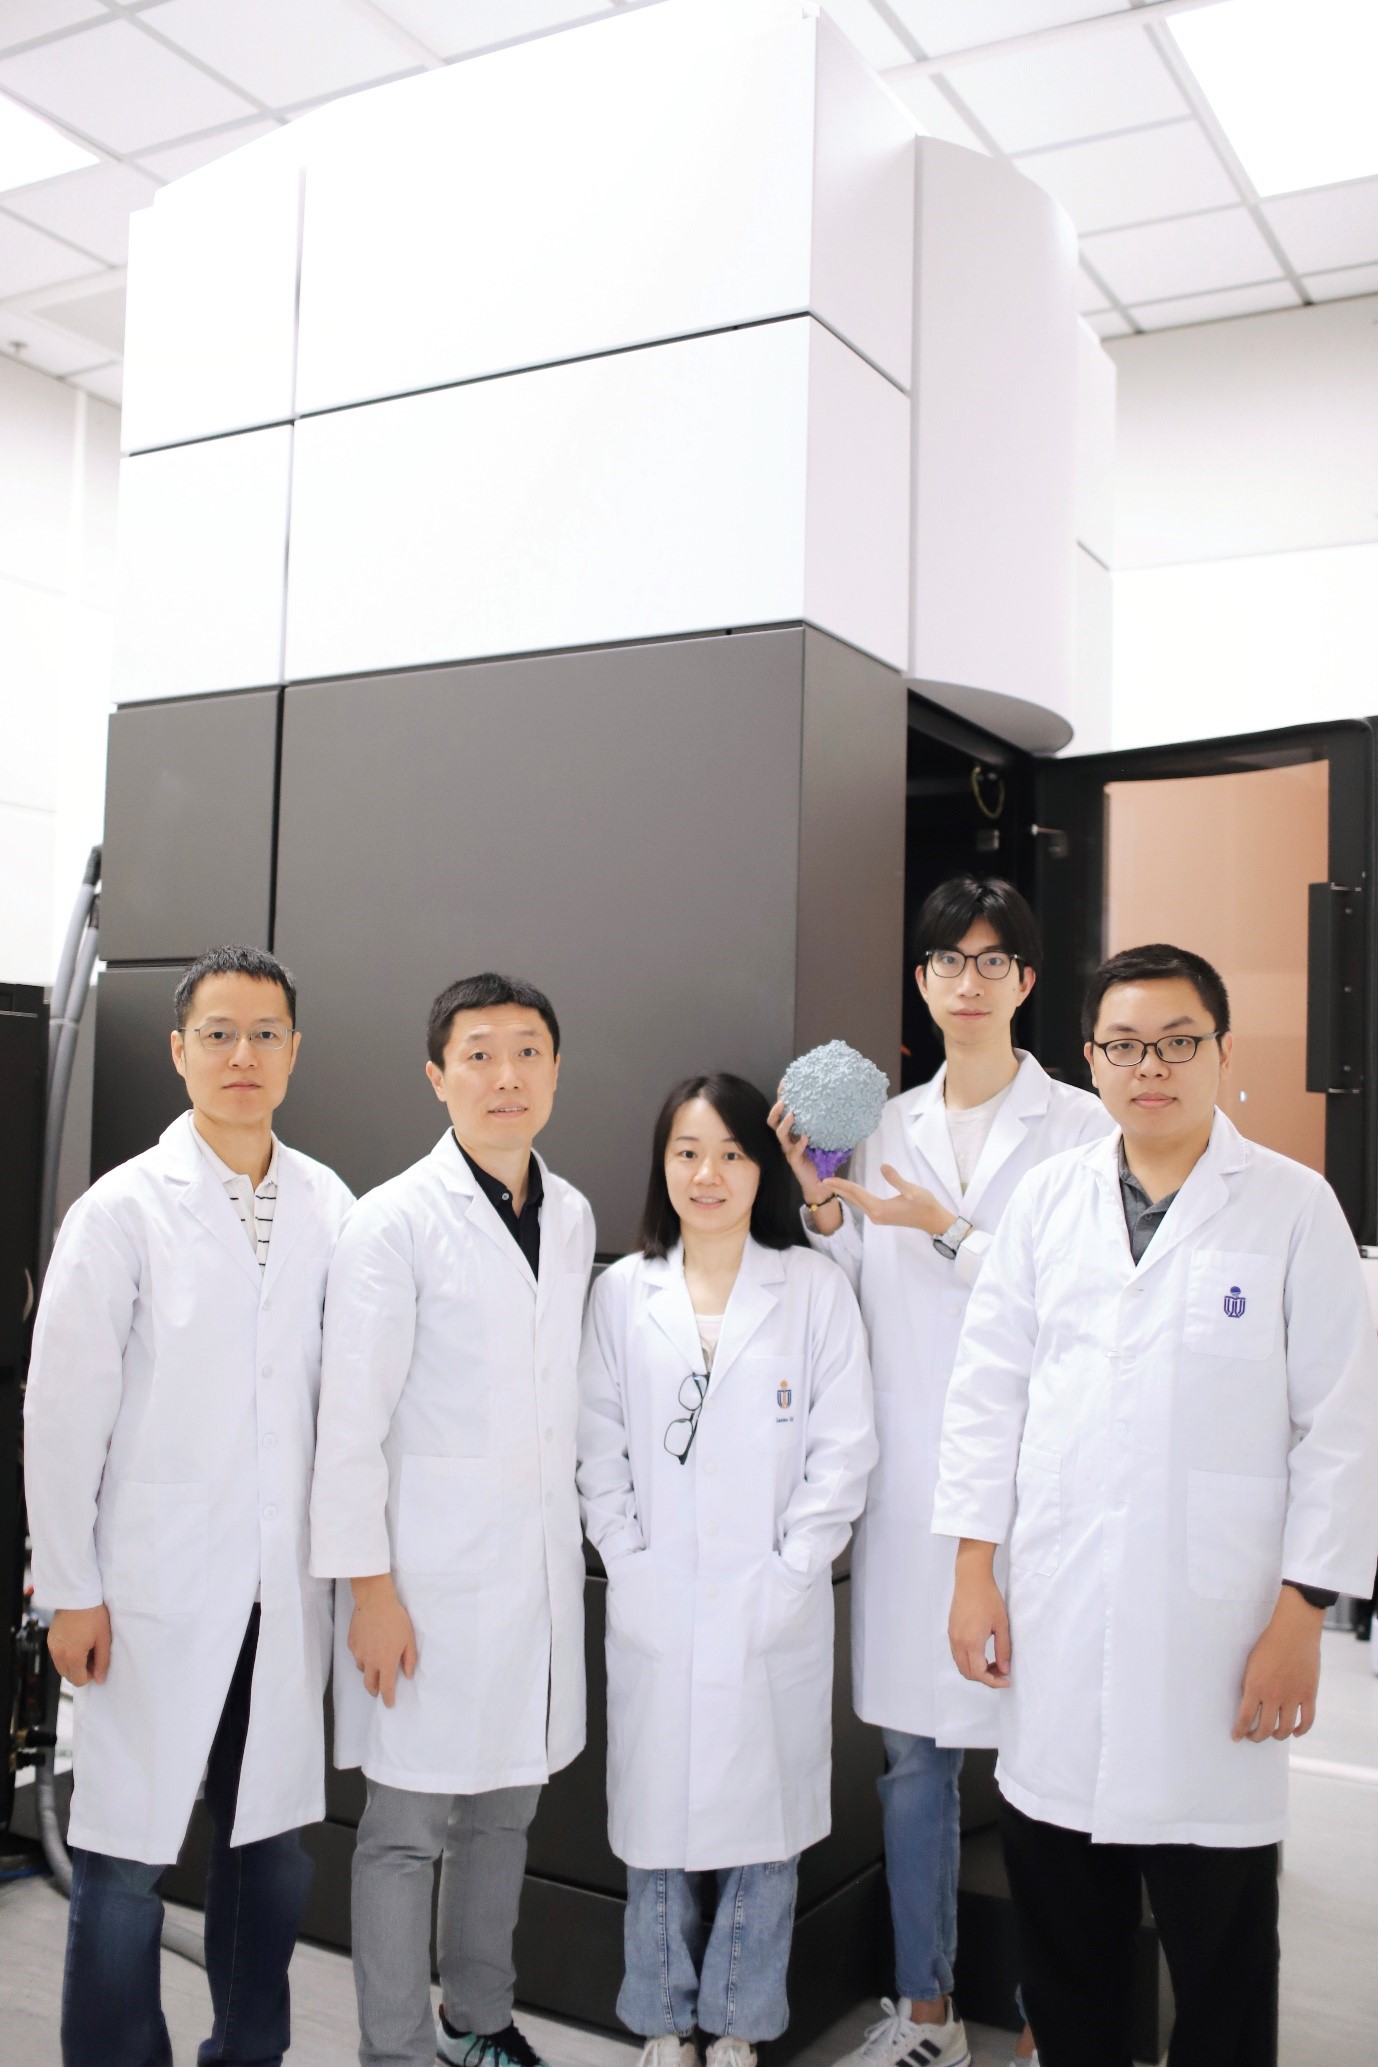 Photo of the research team, featuring Prof. DANG Shangyu, Prof. ZENG Qinglu, Dr. CAI Lanlan, Mr. LIU Hang (With the 3D printed cyanophage structure in his hands), and Mr. XIAO Shiwei, from left to right.